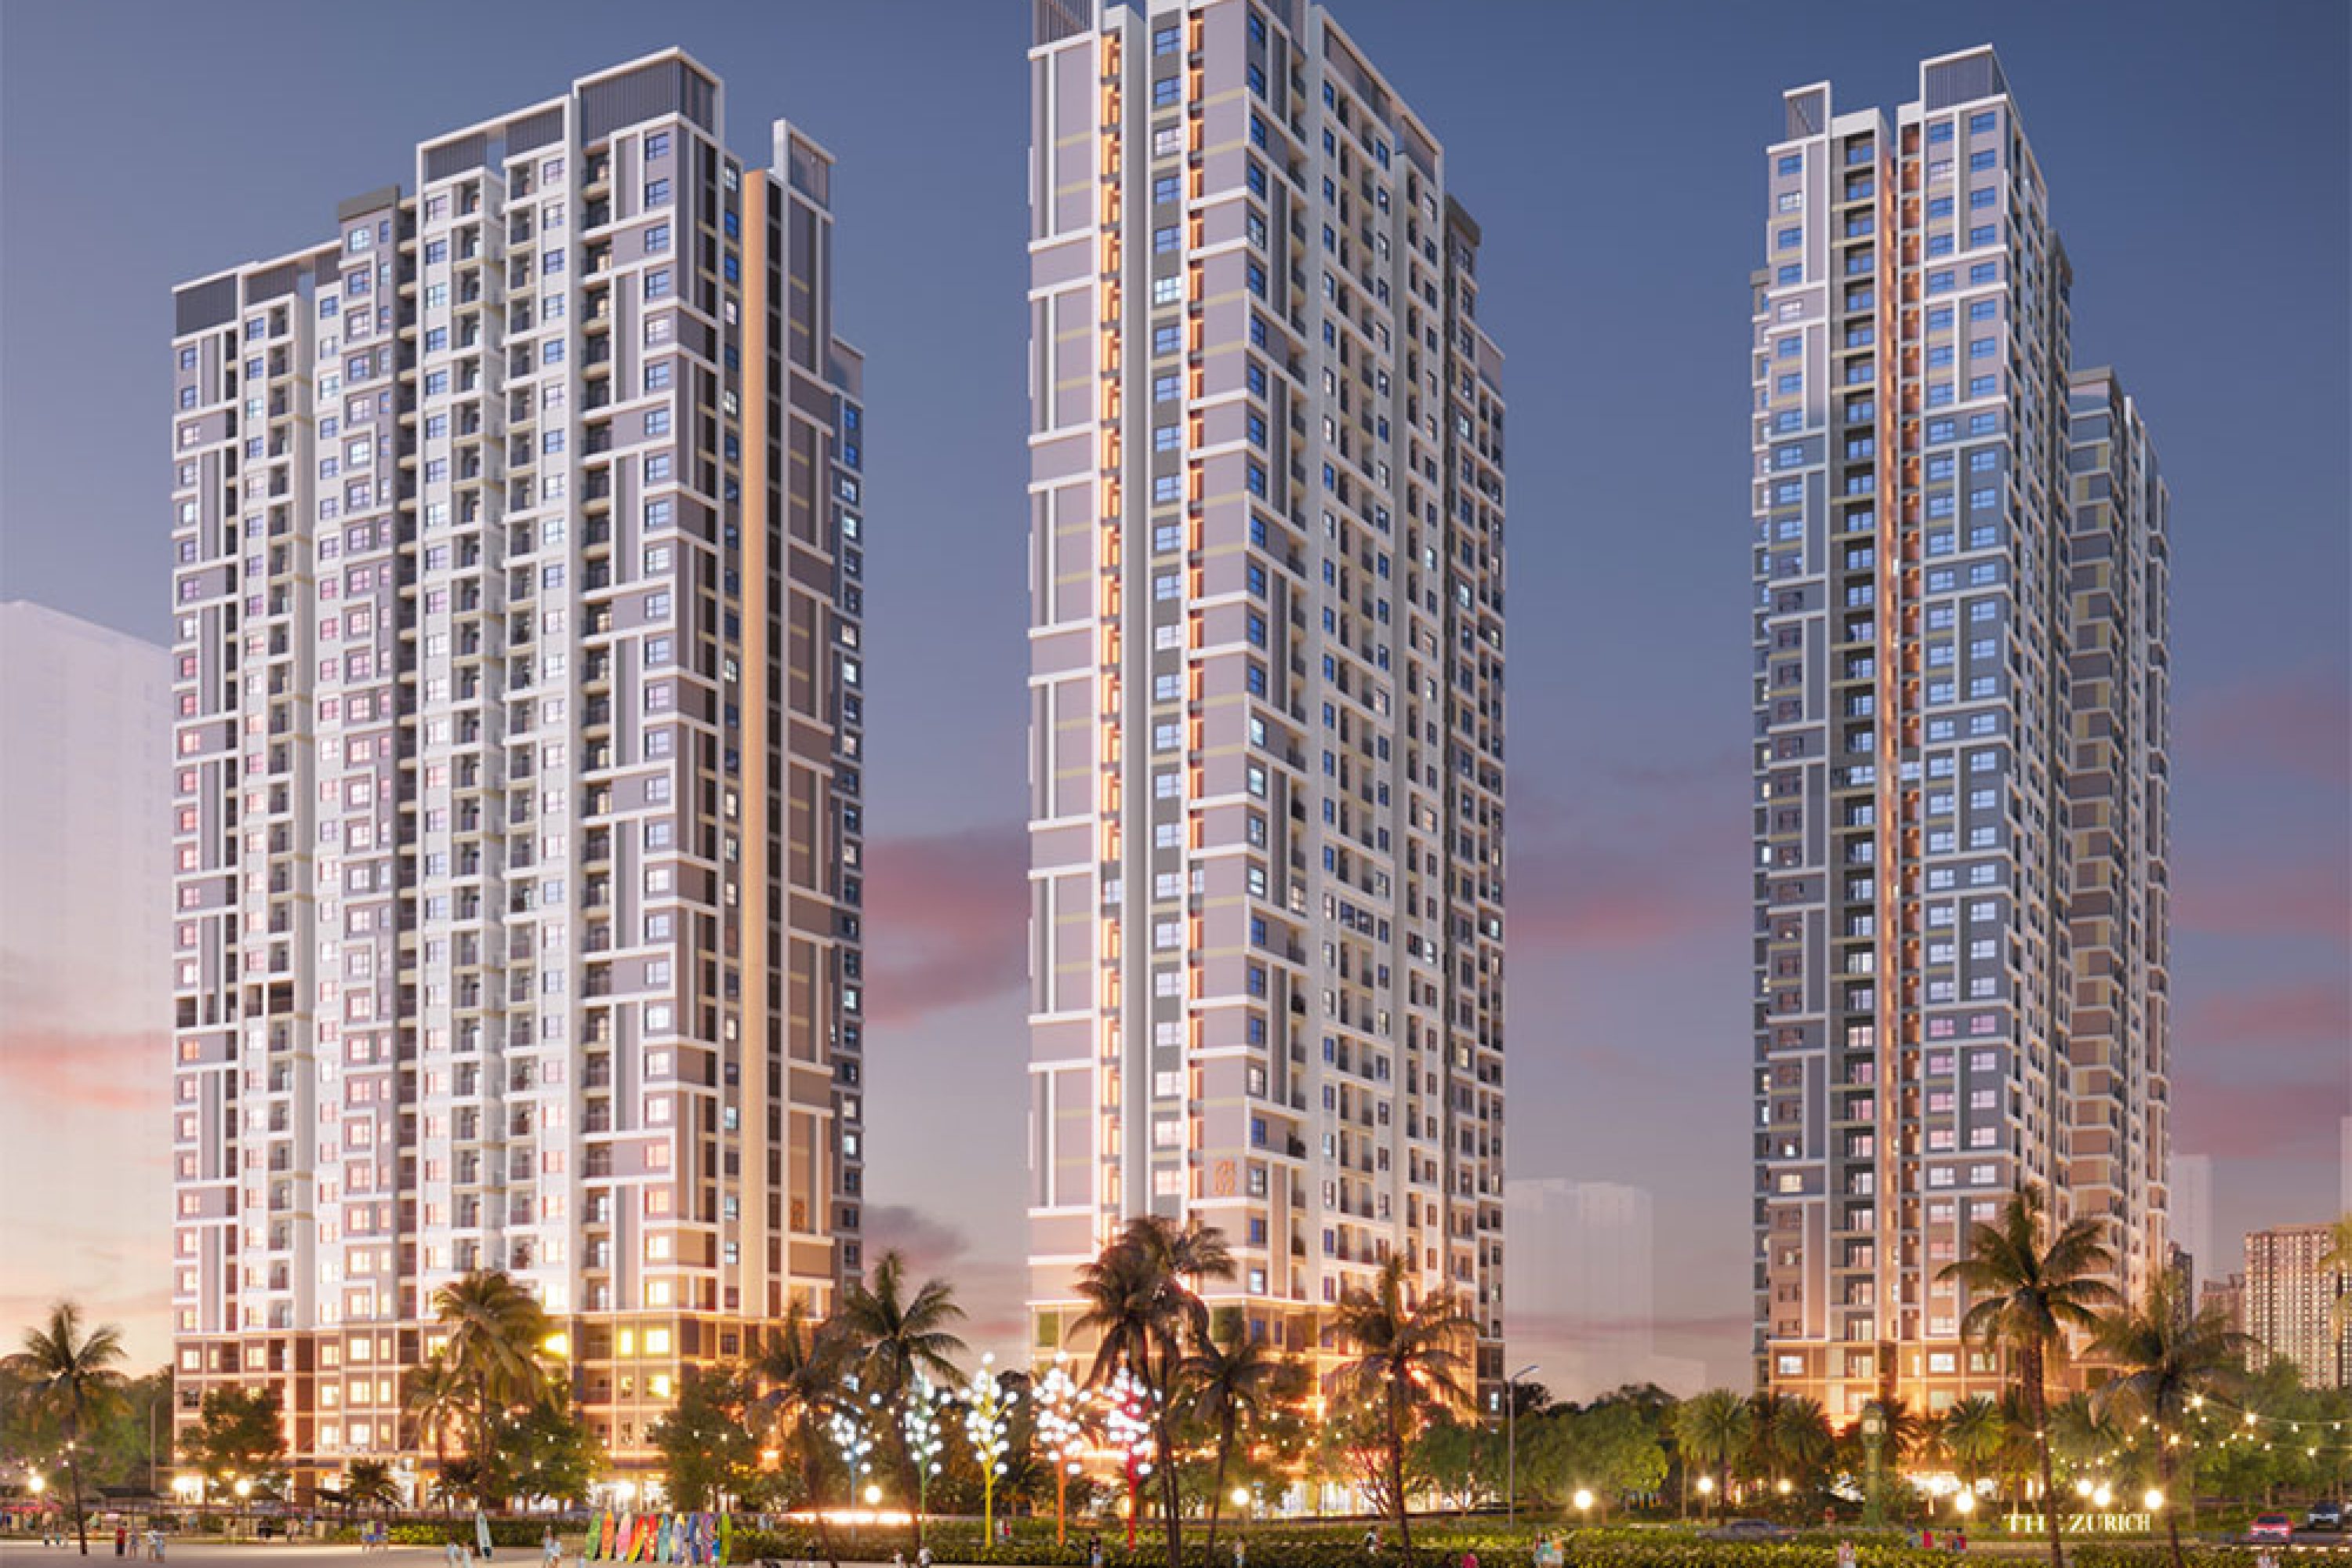 The Metropolitan - Vinhomes Ocean Park is about to launch display homes